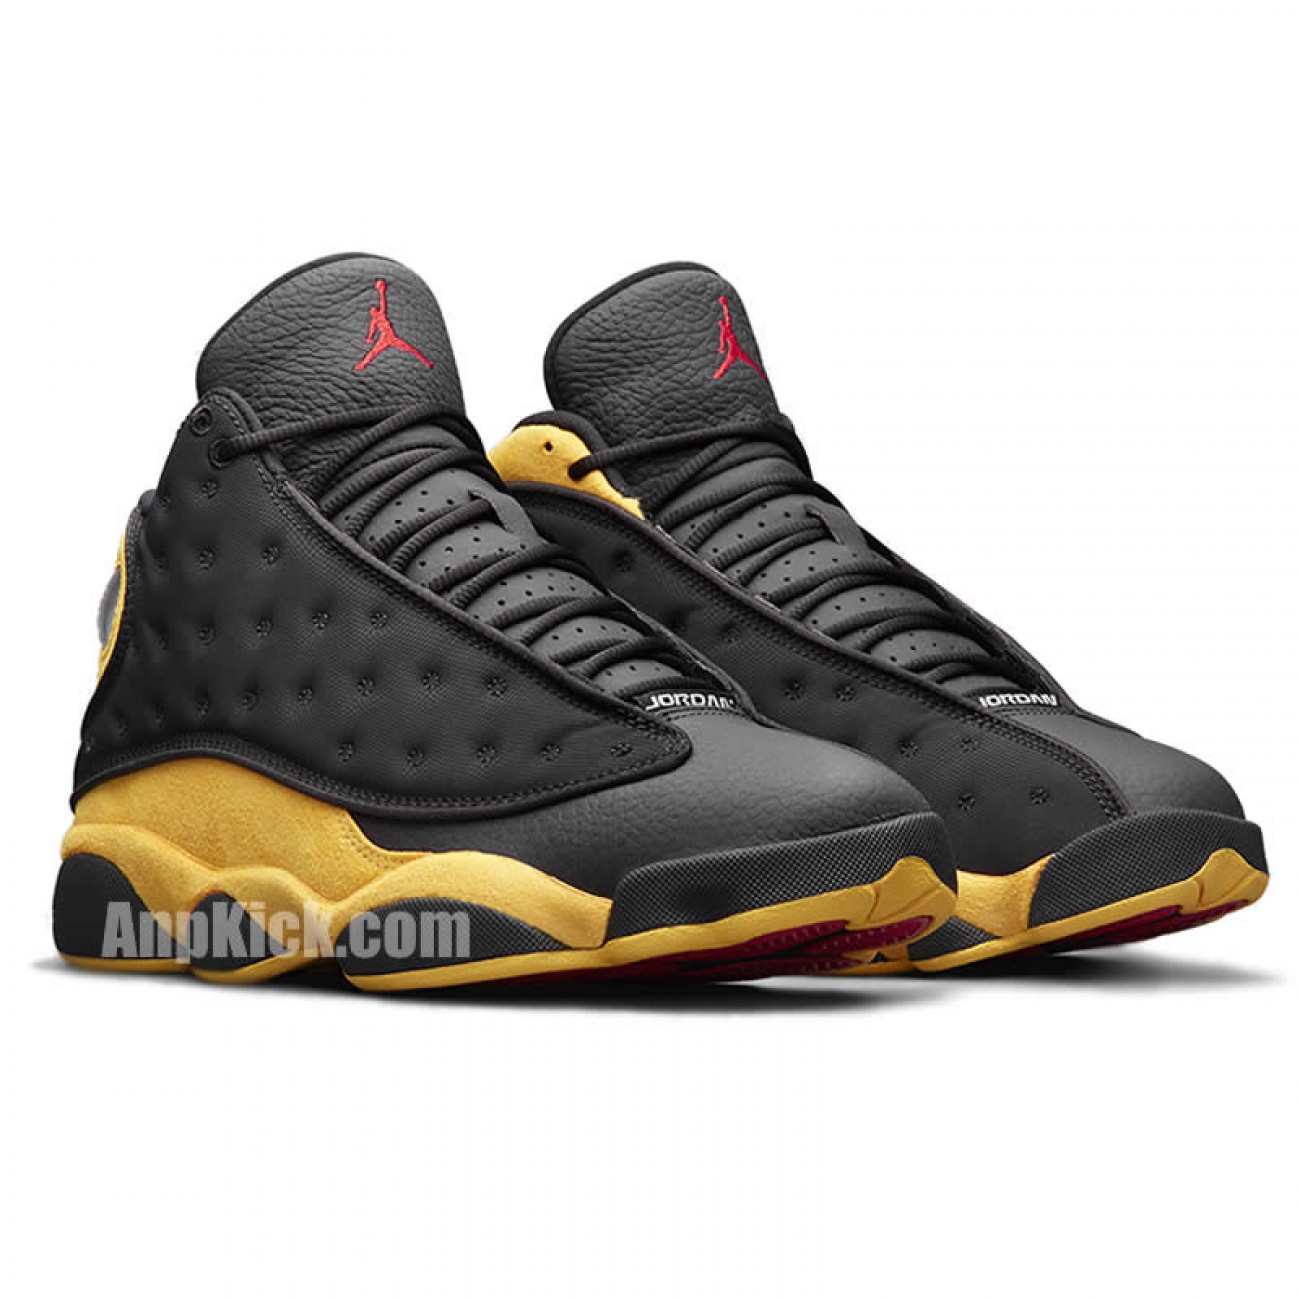 Air Jordan 13 Melo "Class of 2002" Black and Yellow/Gold 414571-035